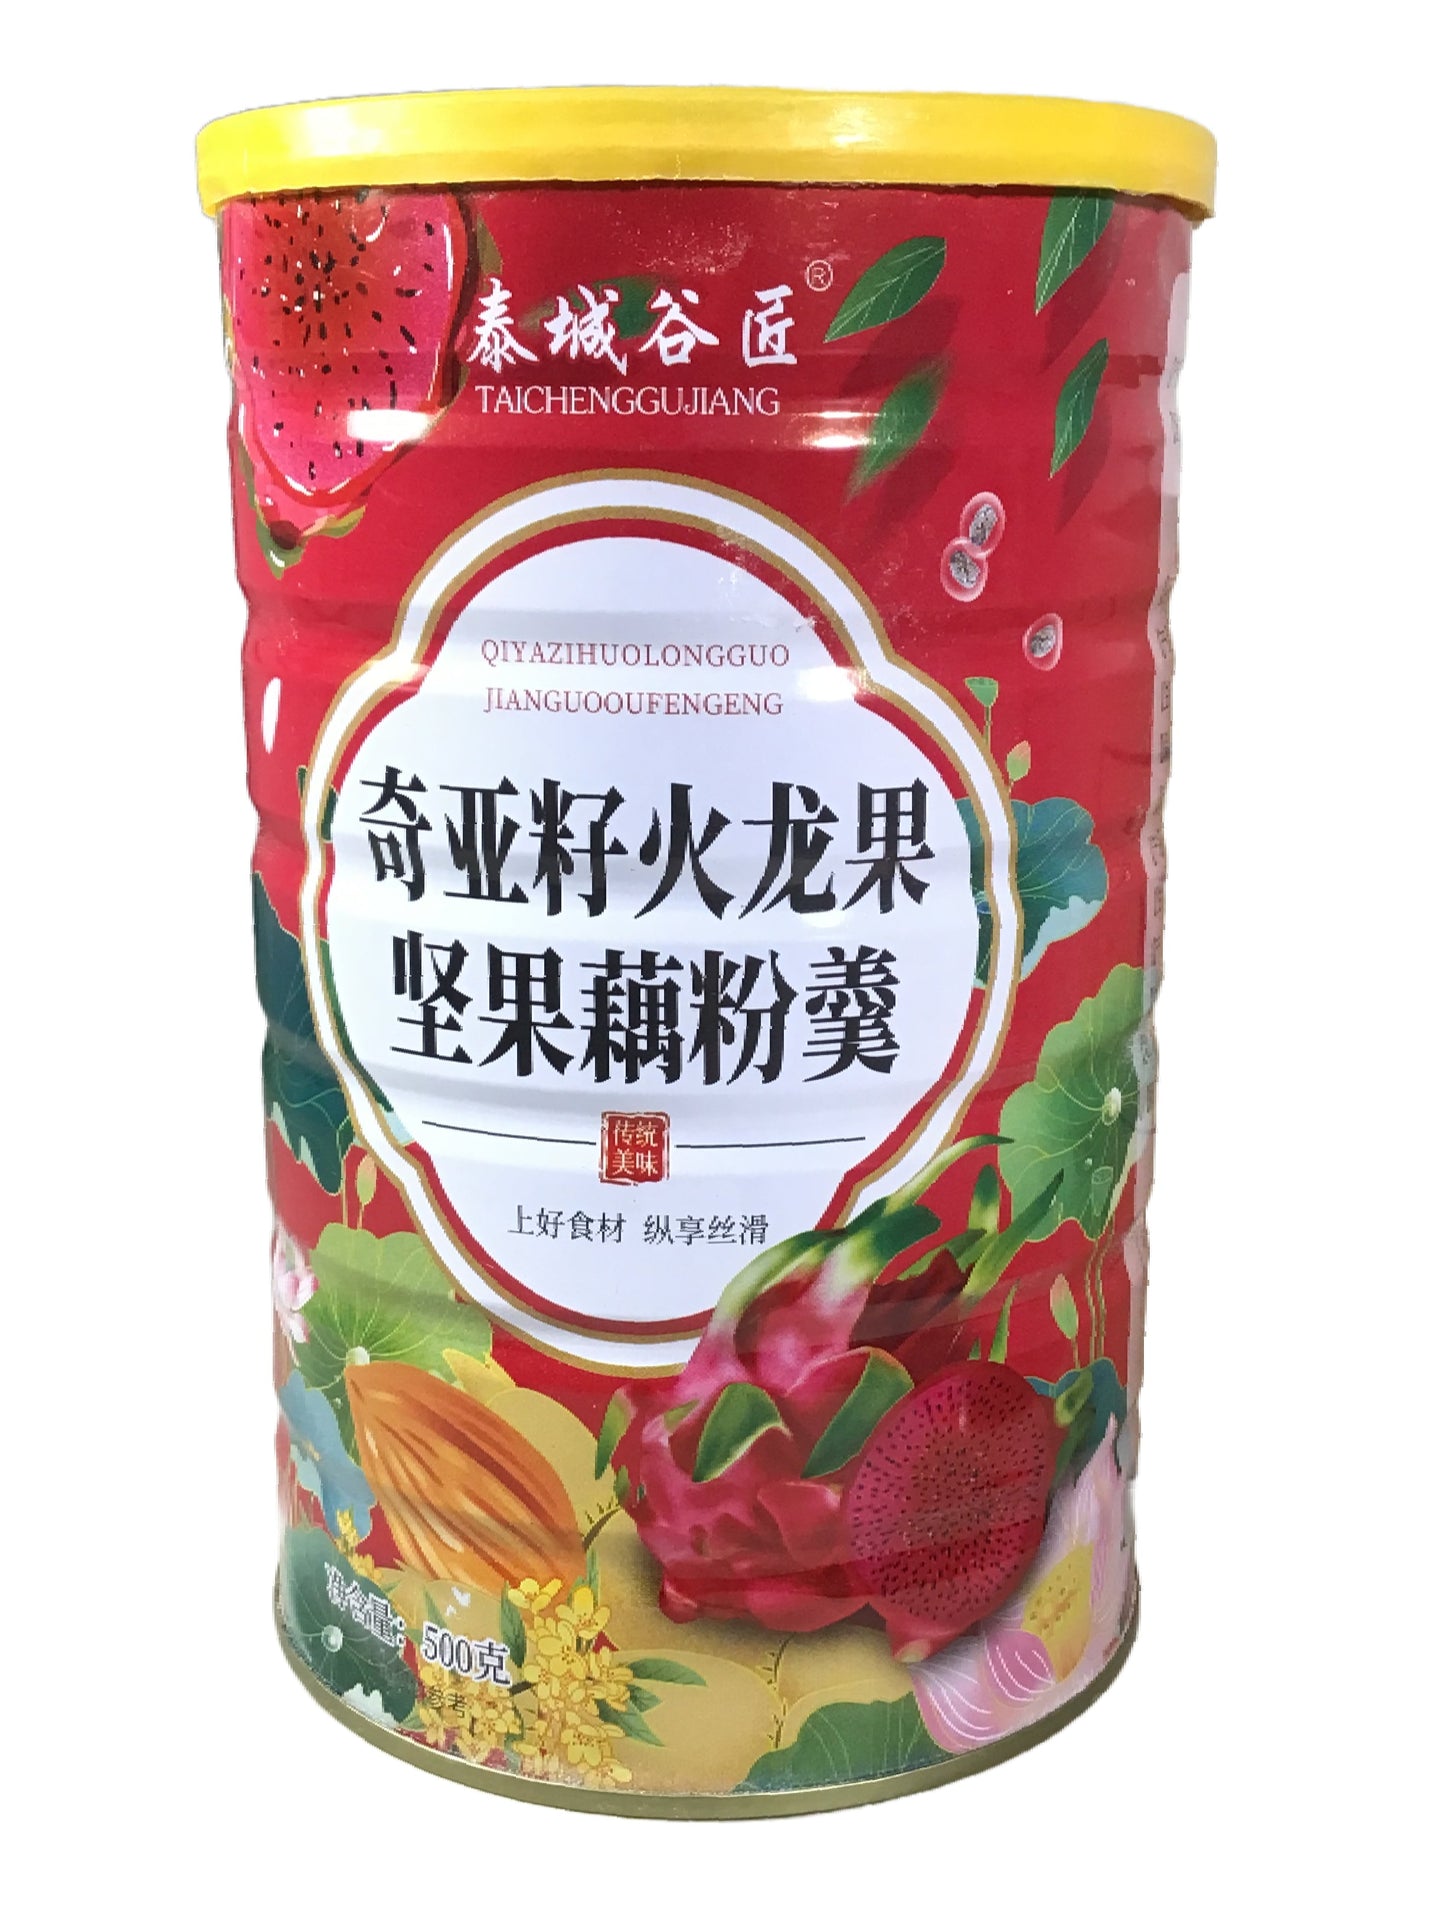 Chia Seed Dragonfruit Lotus Root and Nuts Instant Granules - 奇亚籽火龙果坚果藕粉羹